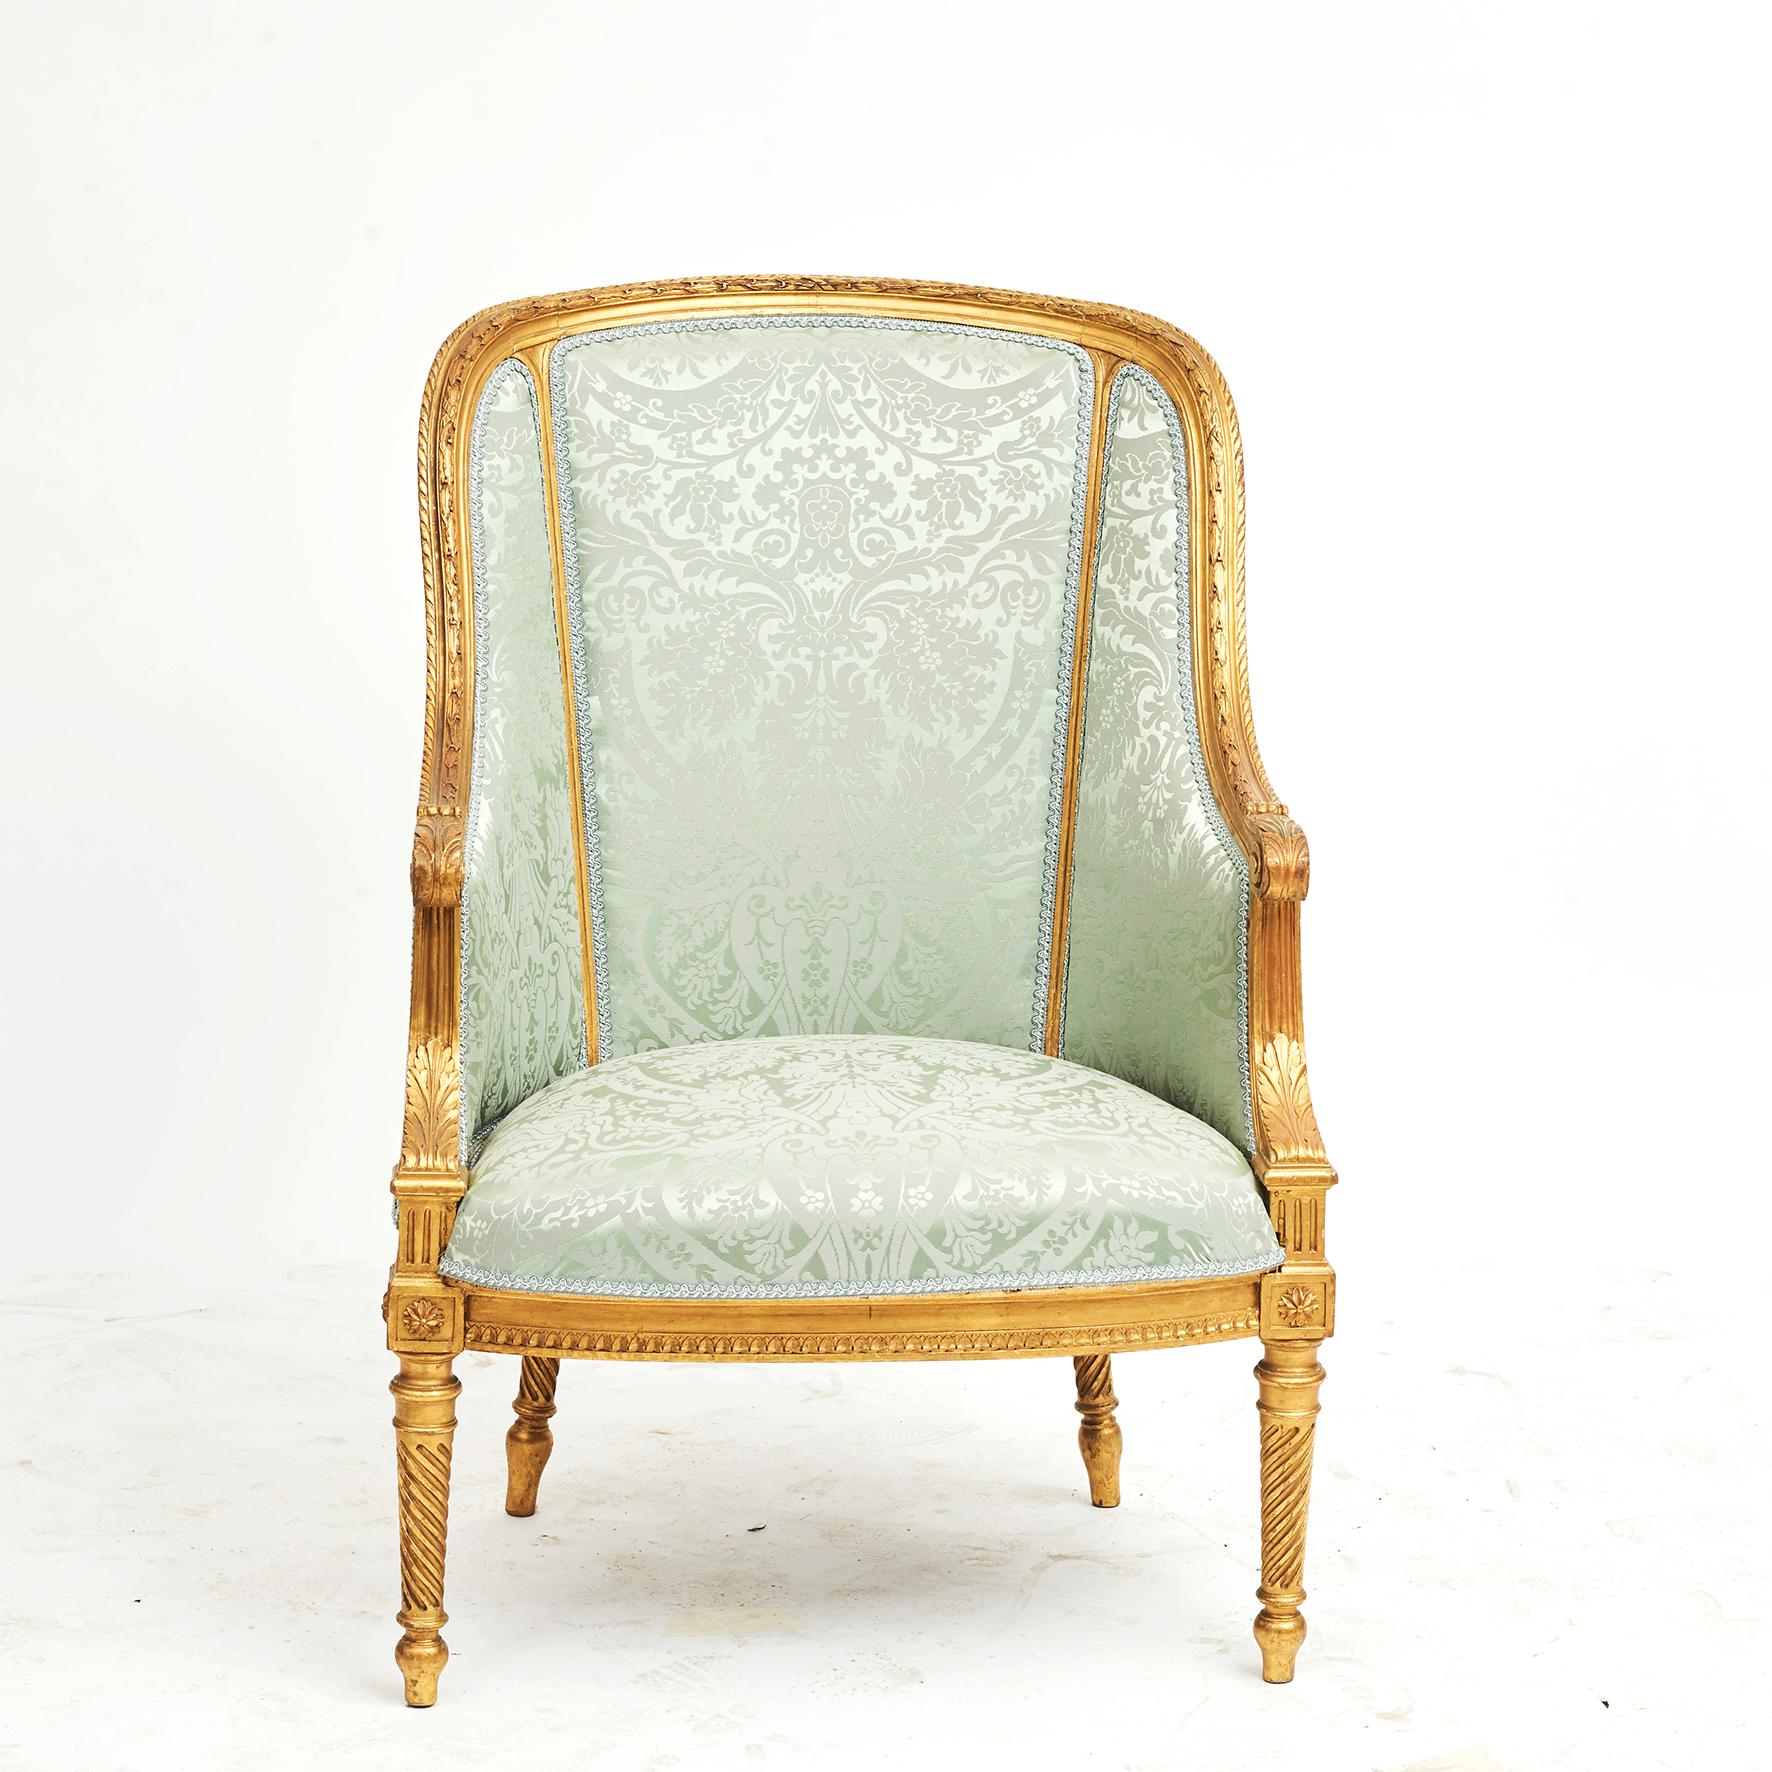 Louis XVI style wing chair. Hand carved giltwood. Royal provenance.
Presumably manufactured by C.B. Hansen (Royal Purveyor) circa 1900.
Untouched original condition (good).